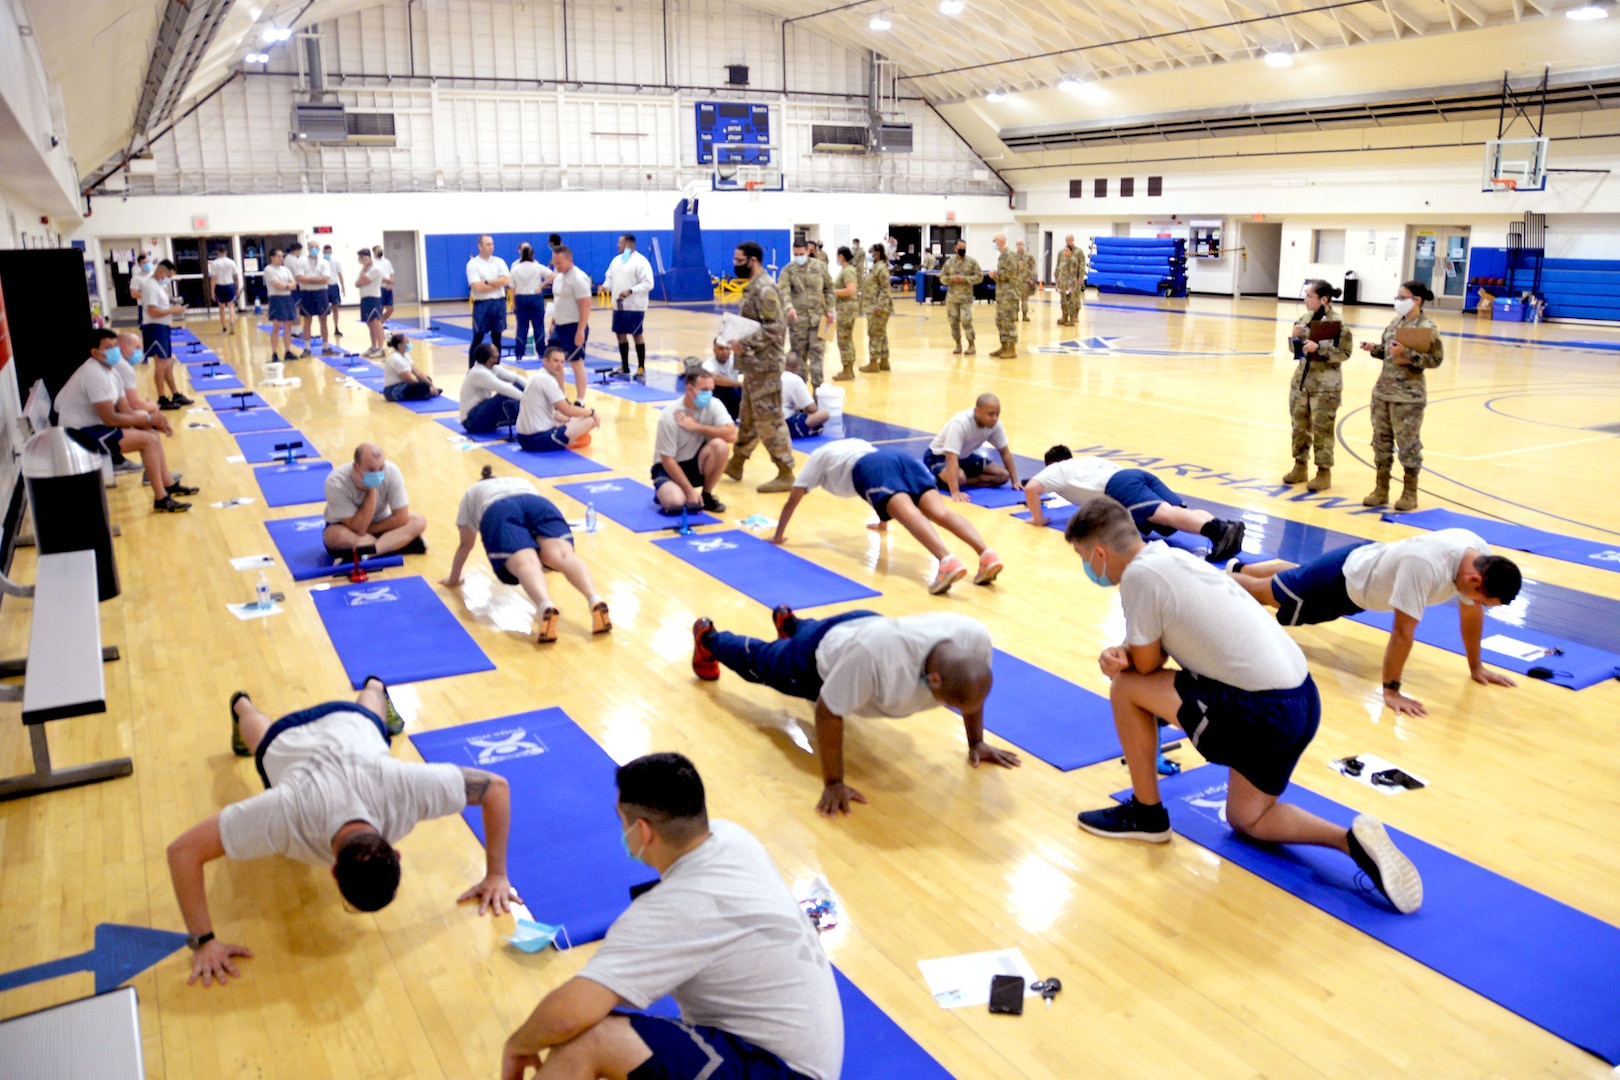 433rd Airlift Wing members participate in a fitness assessment July 10, 2021, at Joint Base San Antonio-Lackland, Texas. This is the first assessment in the wing since the onset of the COVID-19 pandemic. (U.S. Air Force photo by Tech. Sgt. Samantha Mathison)